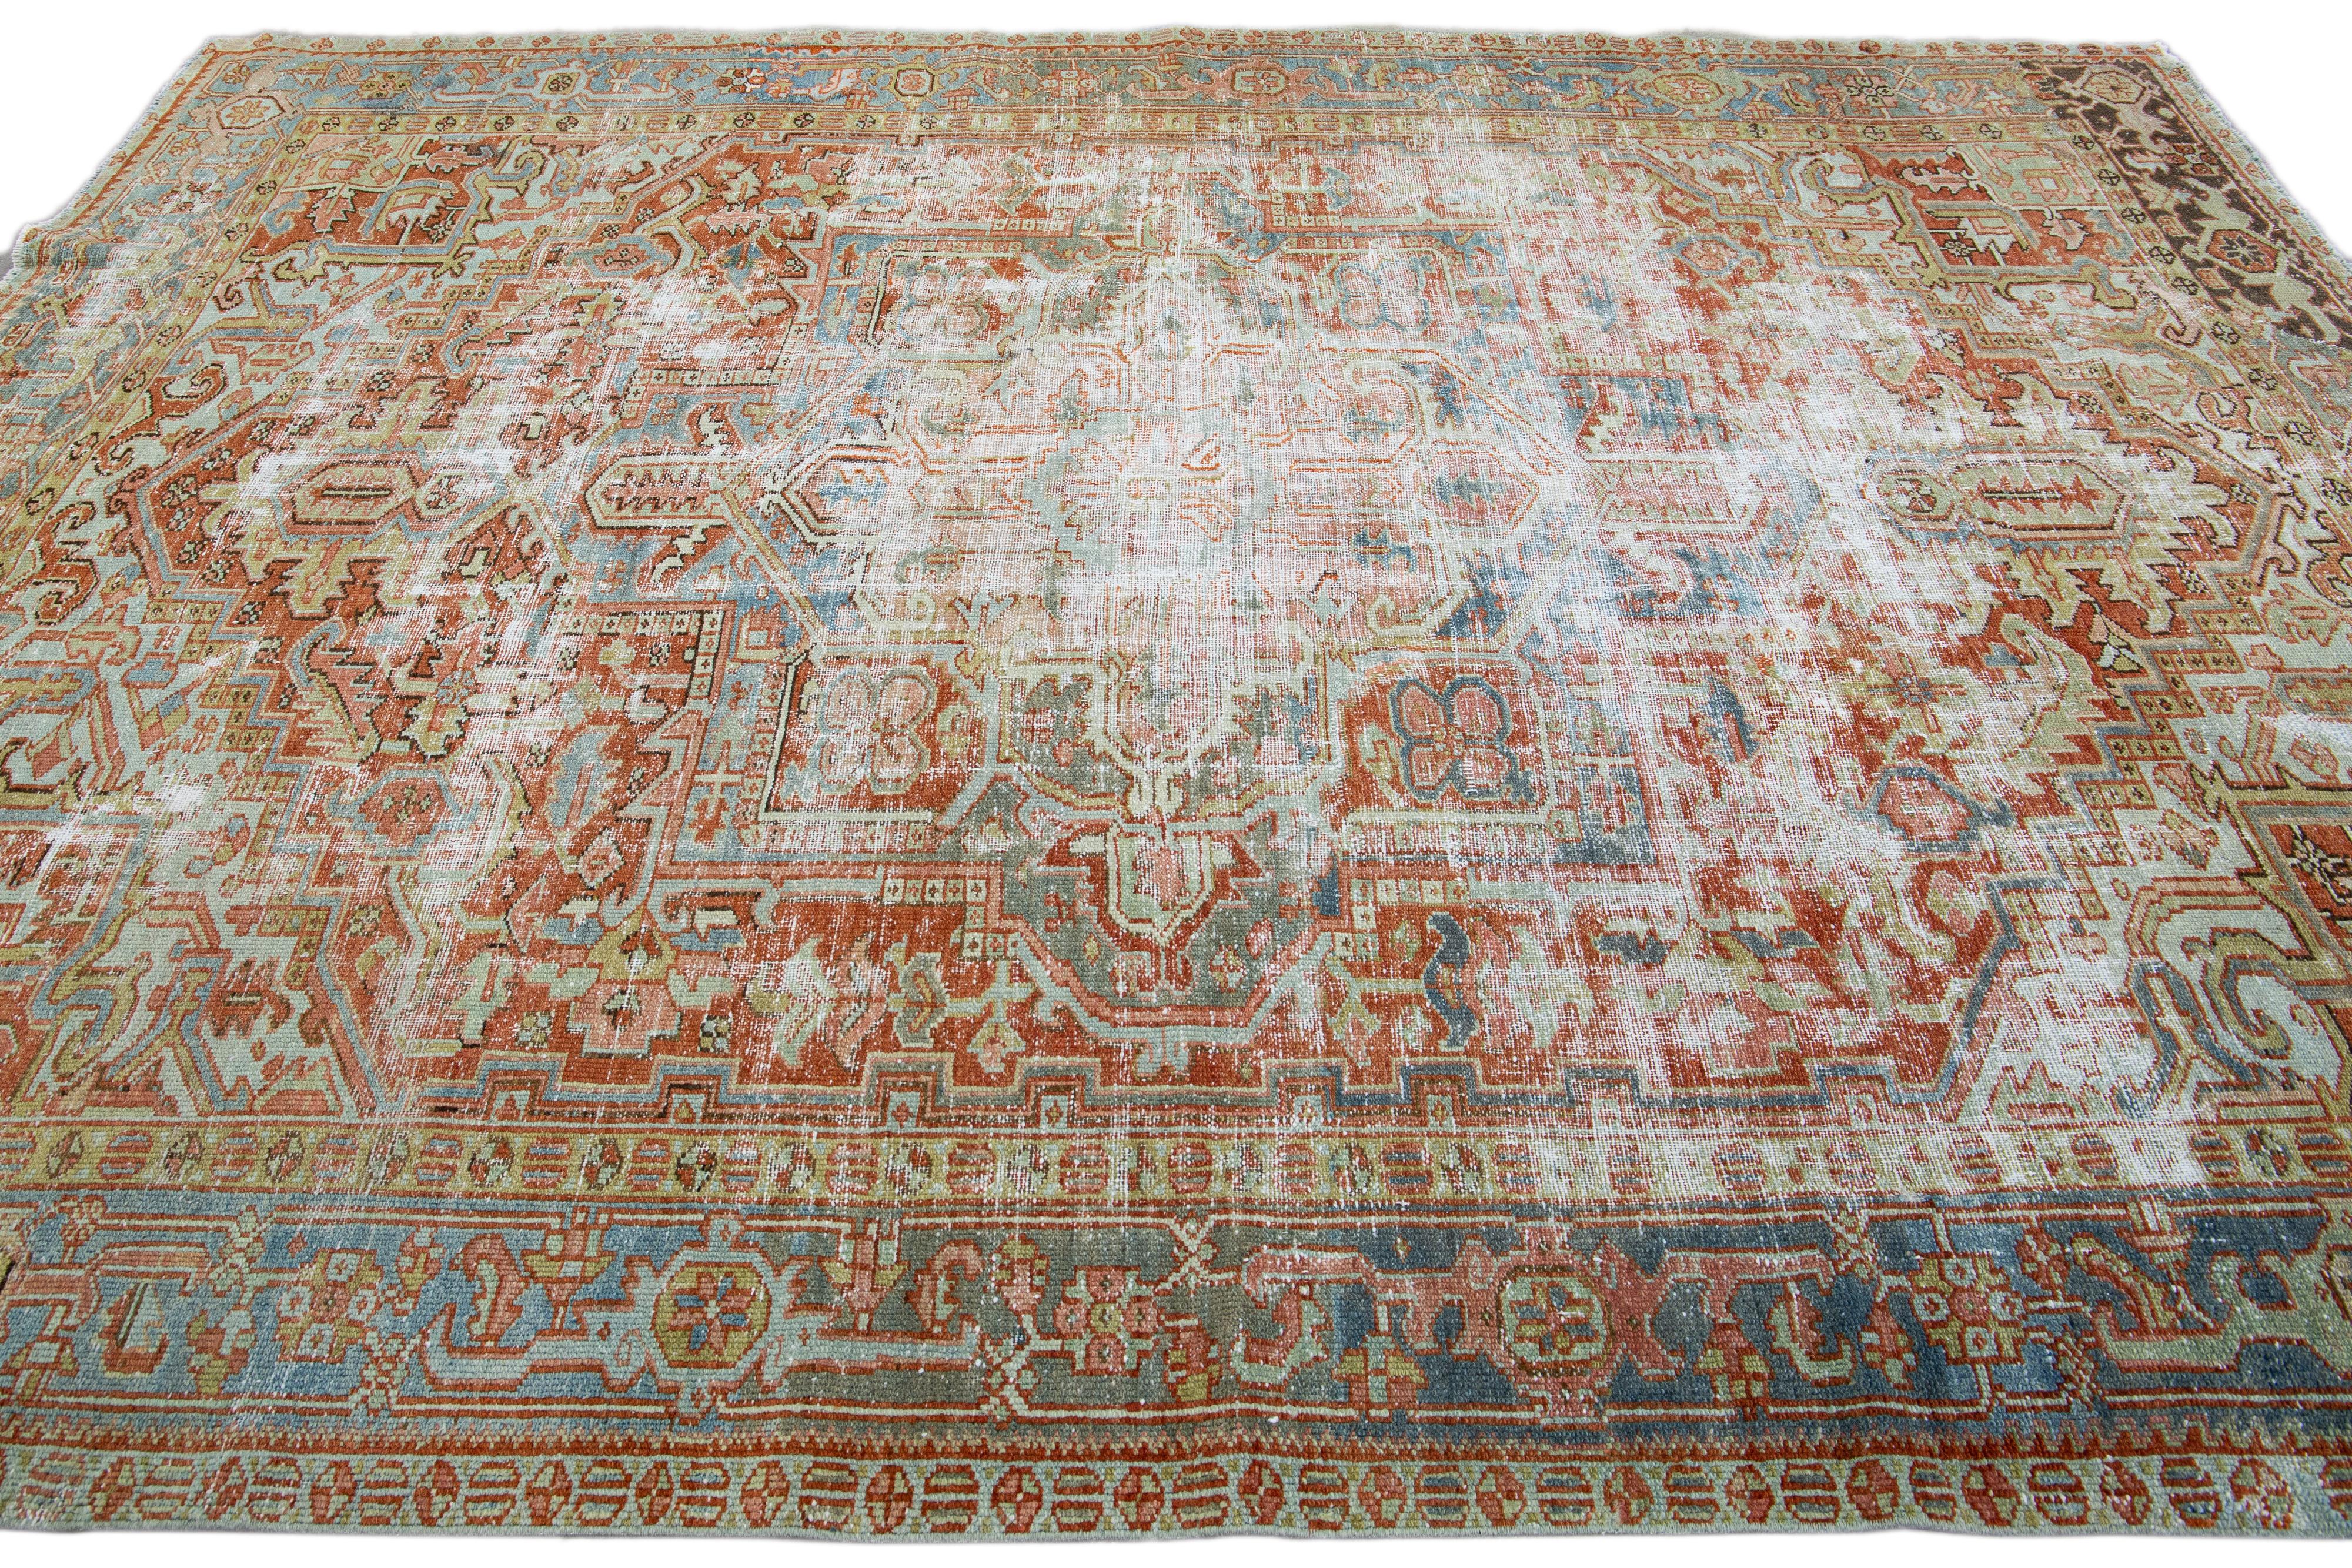 Antique Shabby Chic Persian Heriz Handmade Rusted Wool Rug In Distressed Condition For Sale In Norwalk, CT